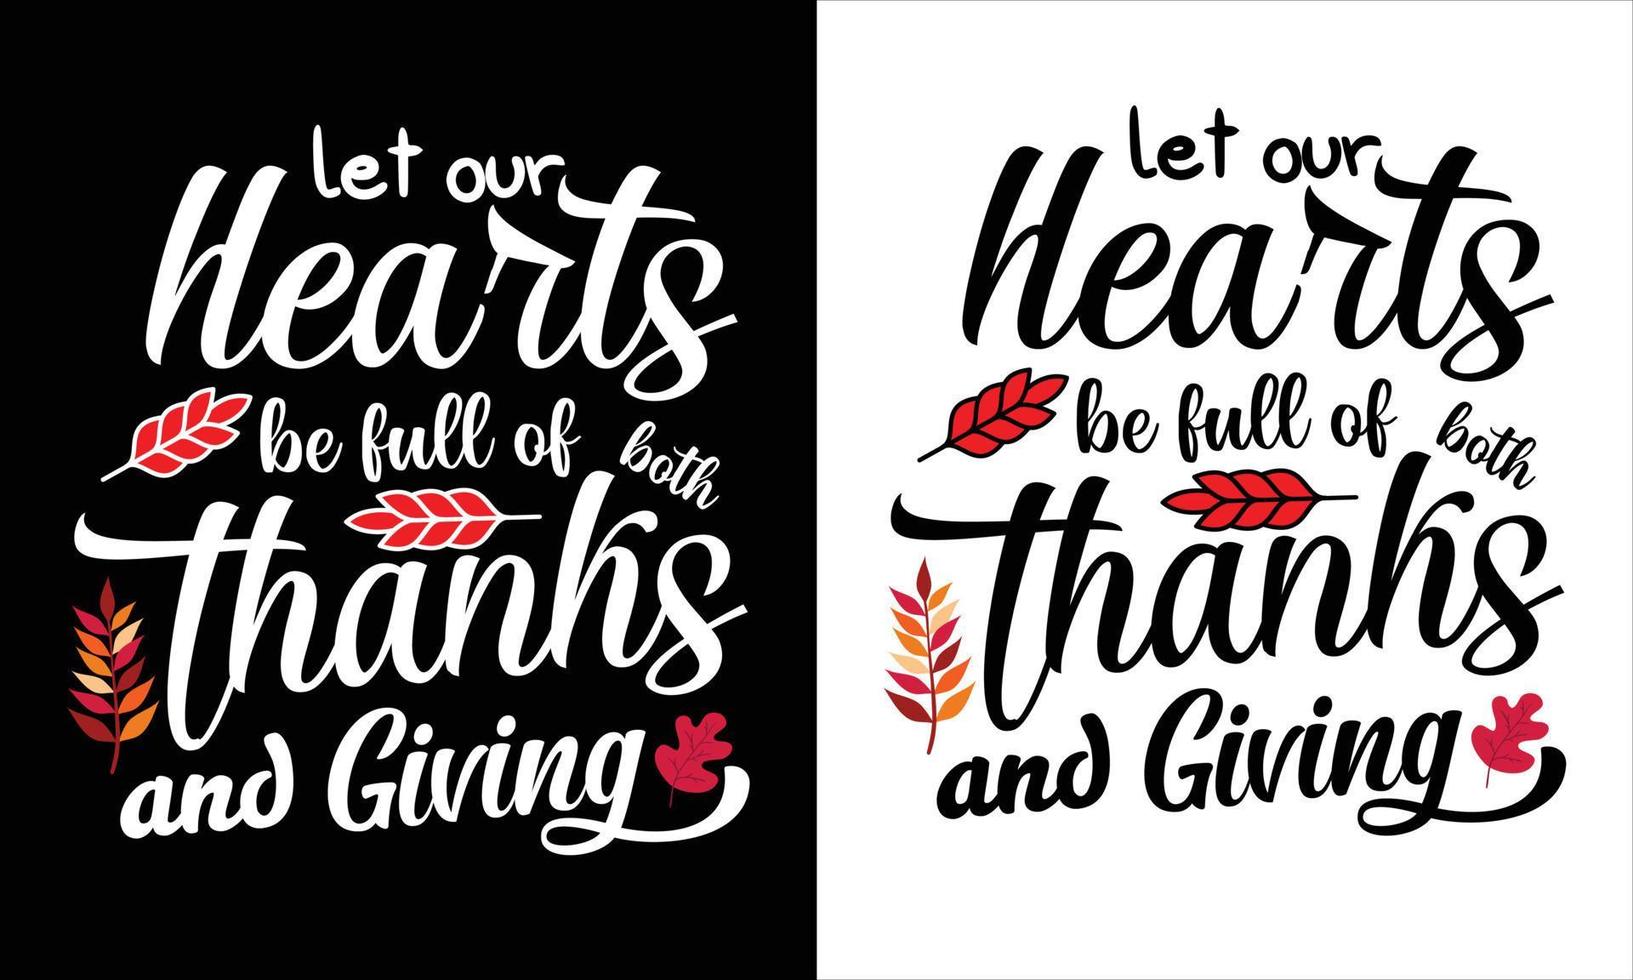 Thanks Giving day t shirt design vector